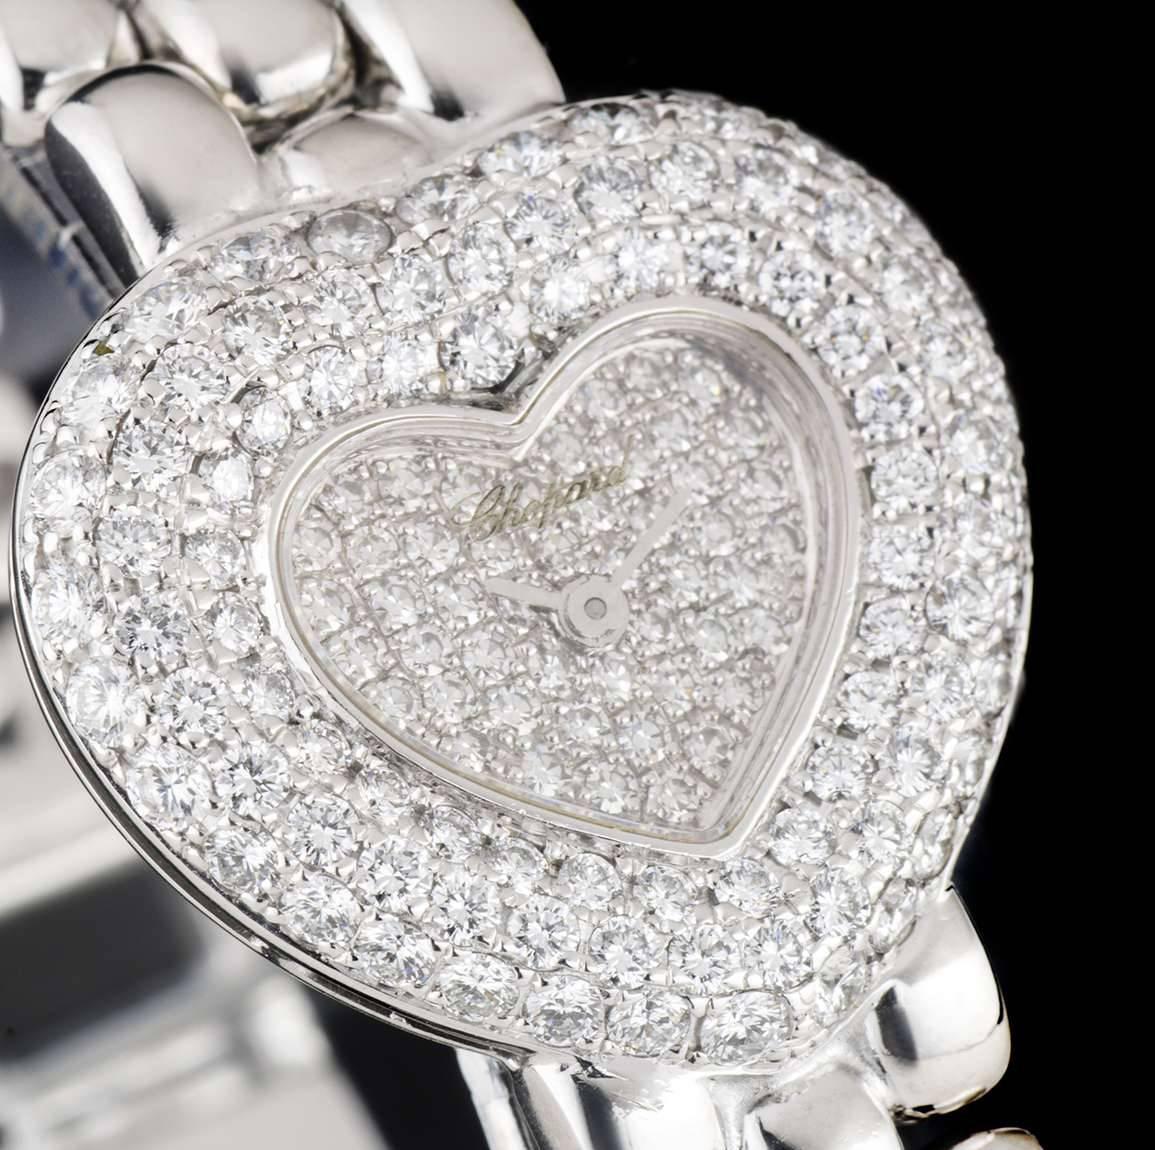 A White Gold Heart Shaped Ladies Wristwatch, pavé diamond set dial, a fixed white gold bezel set with approximately 89 round brilliant cut diamonds, a white gold bracelet with a white gold jewelry style clasp, sapphire glass, quartz movement, in